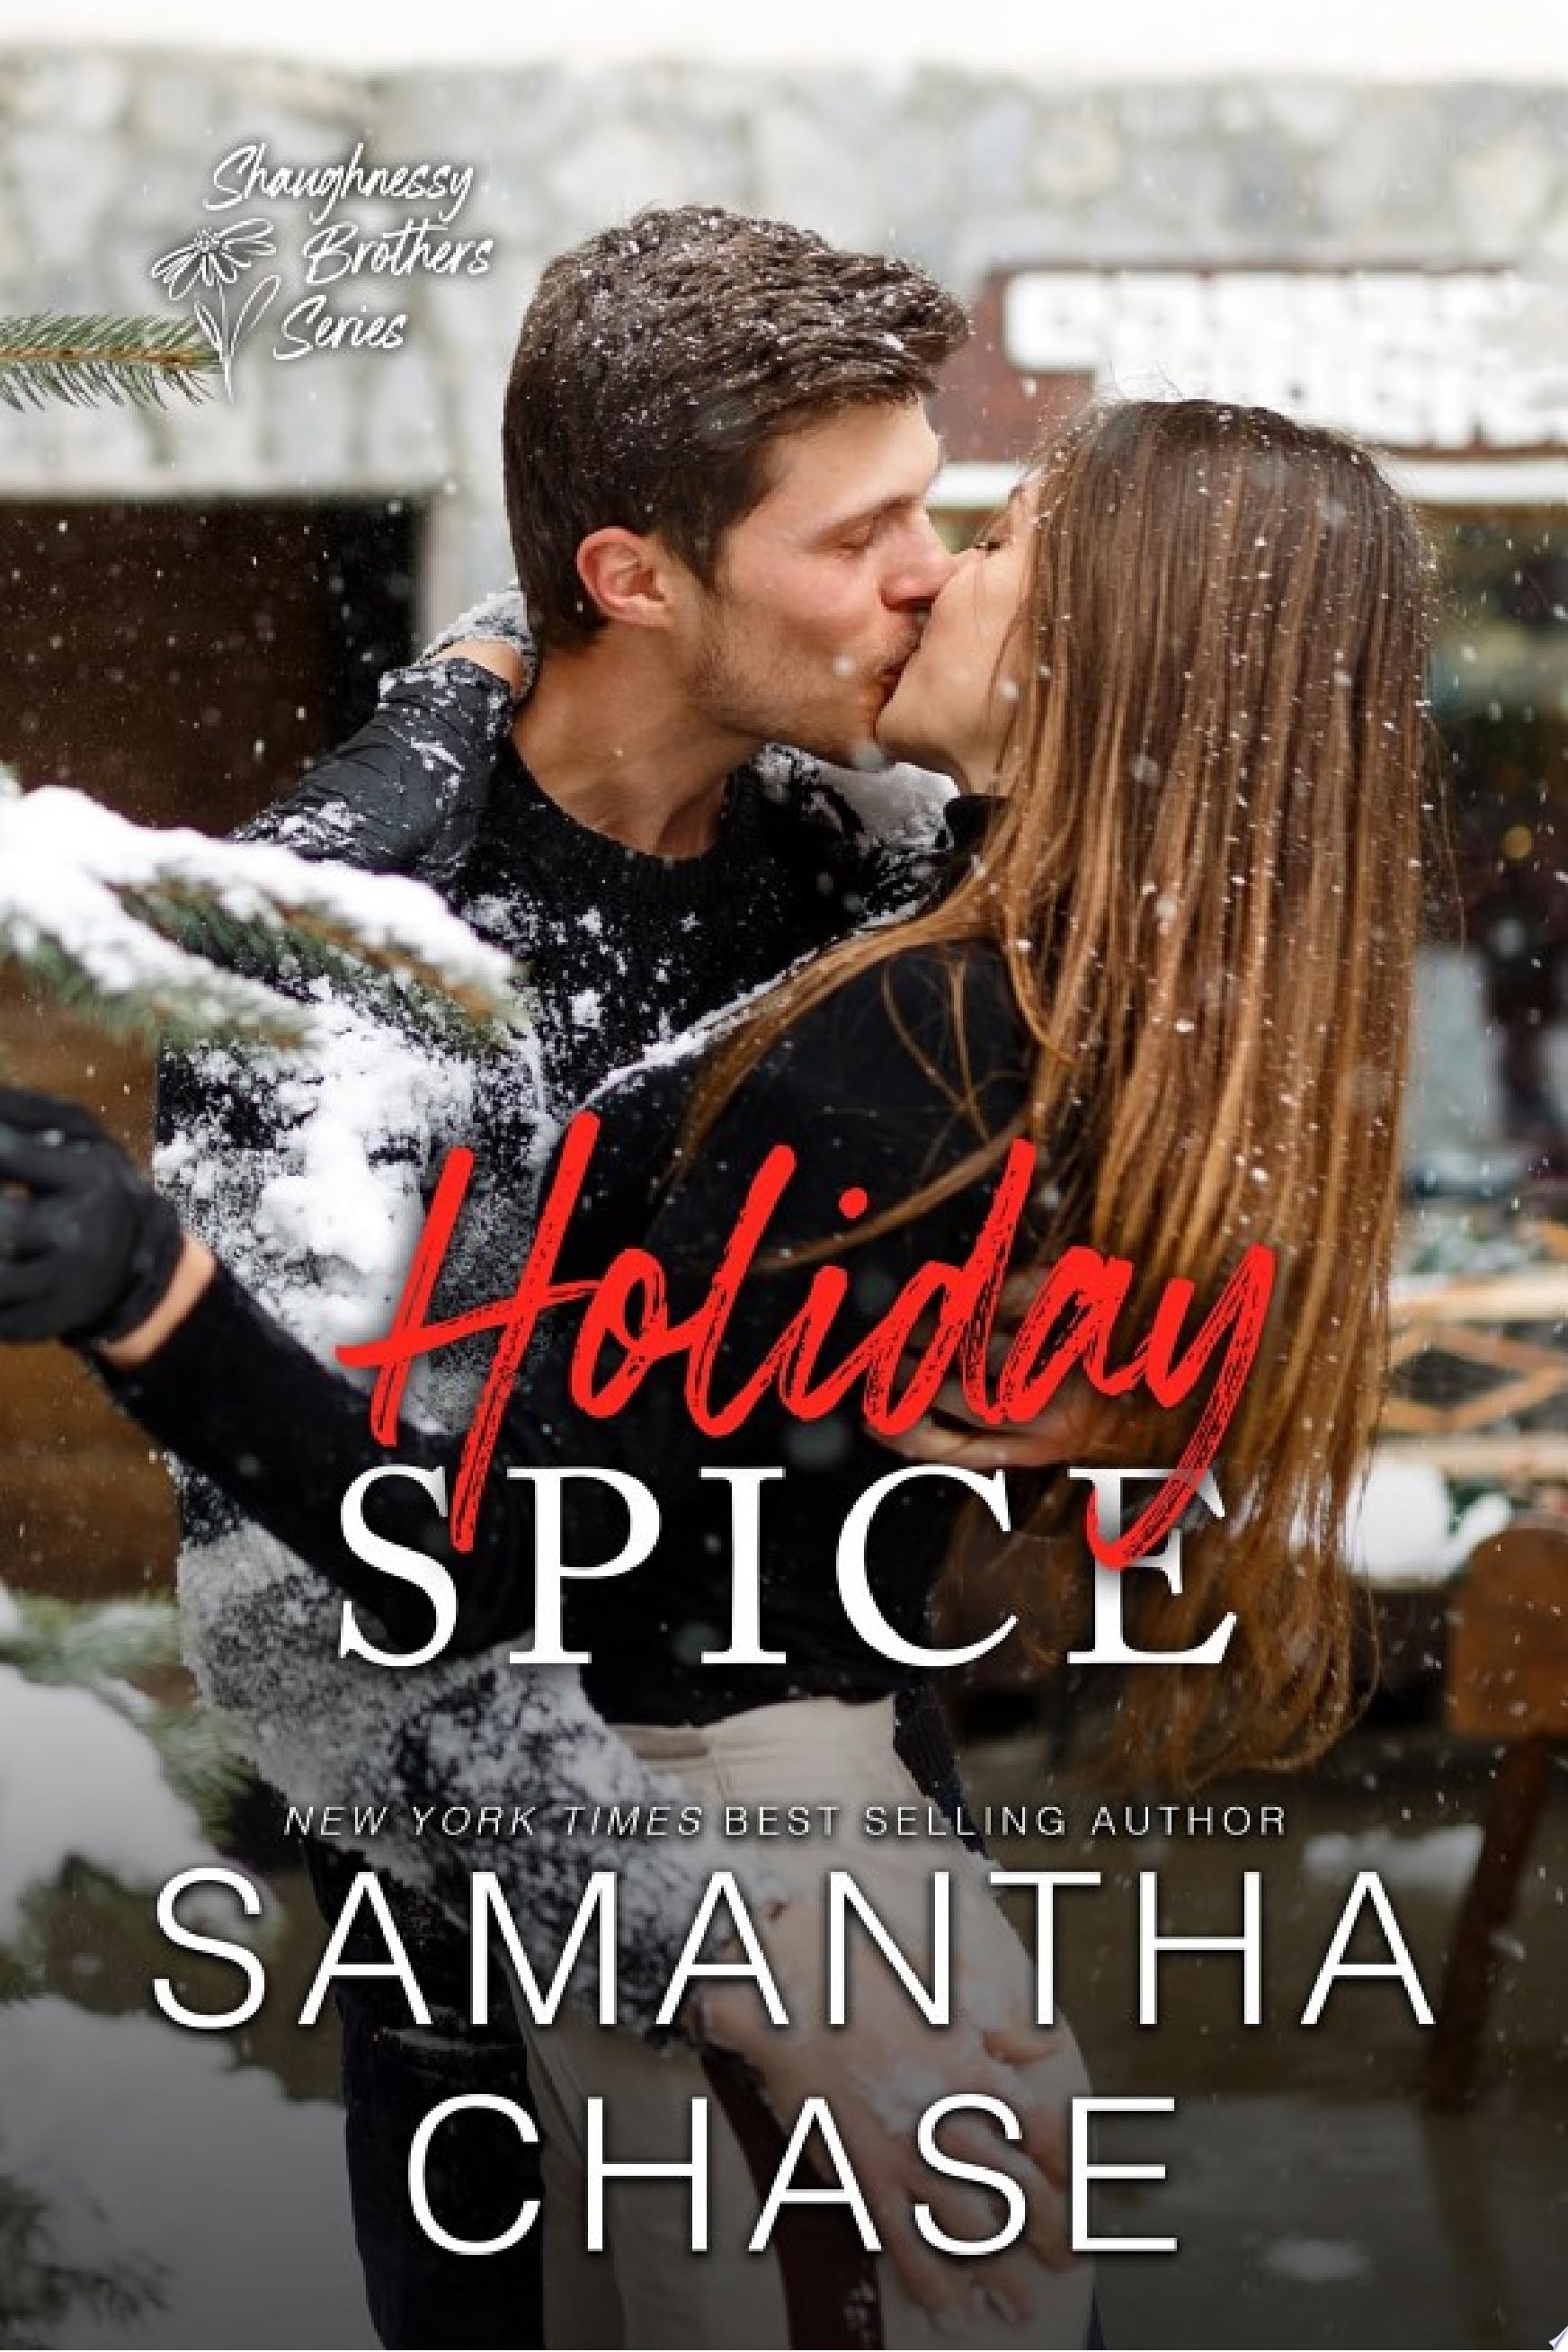 Image for "Holiday Spice"